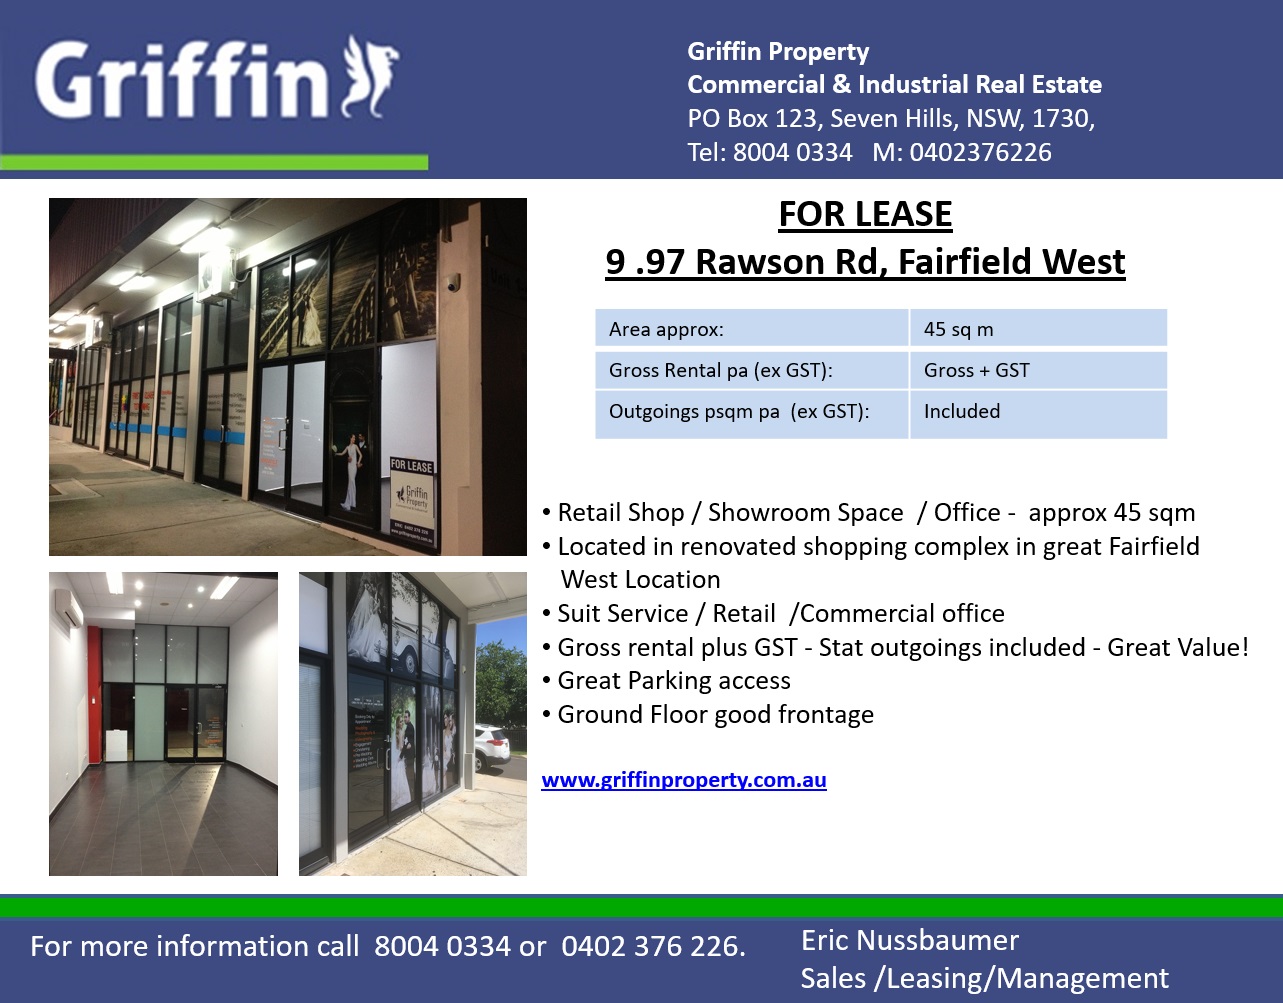 Retail property for lease in fairfield west 3